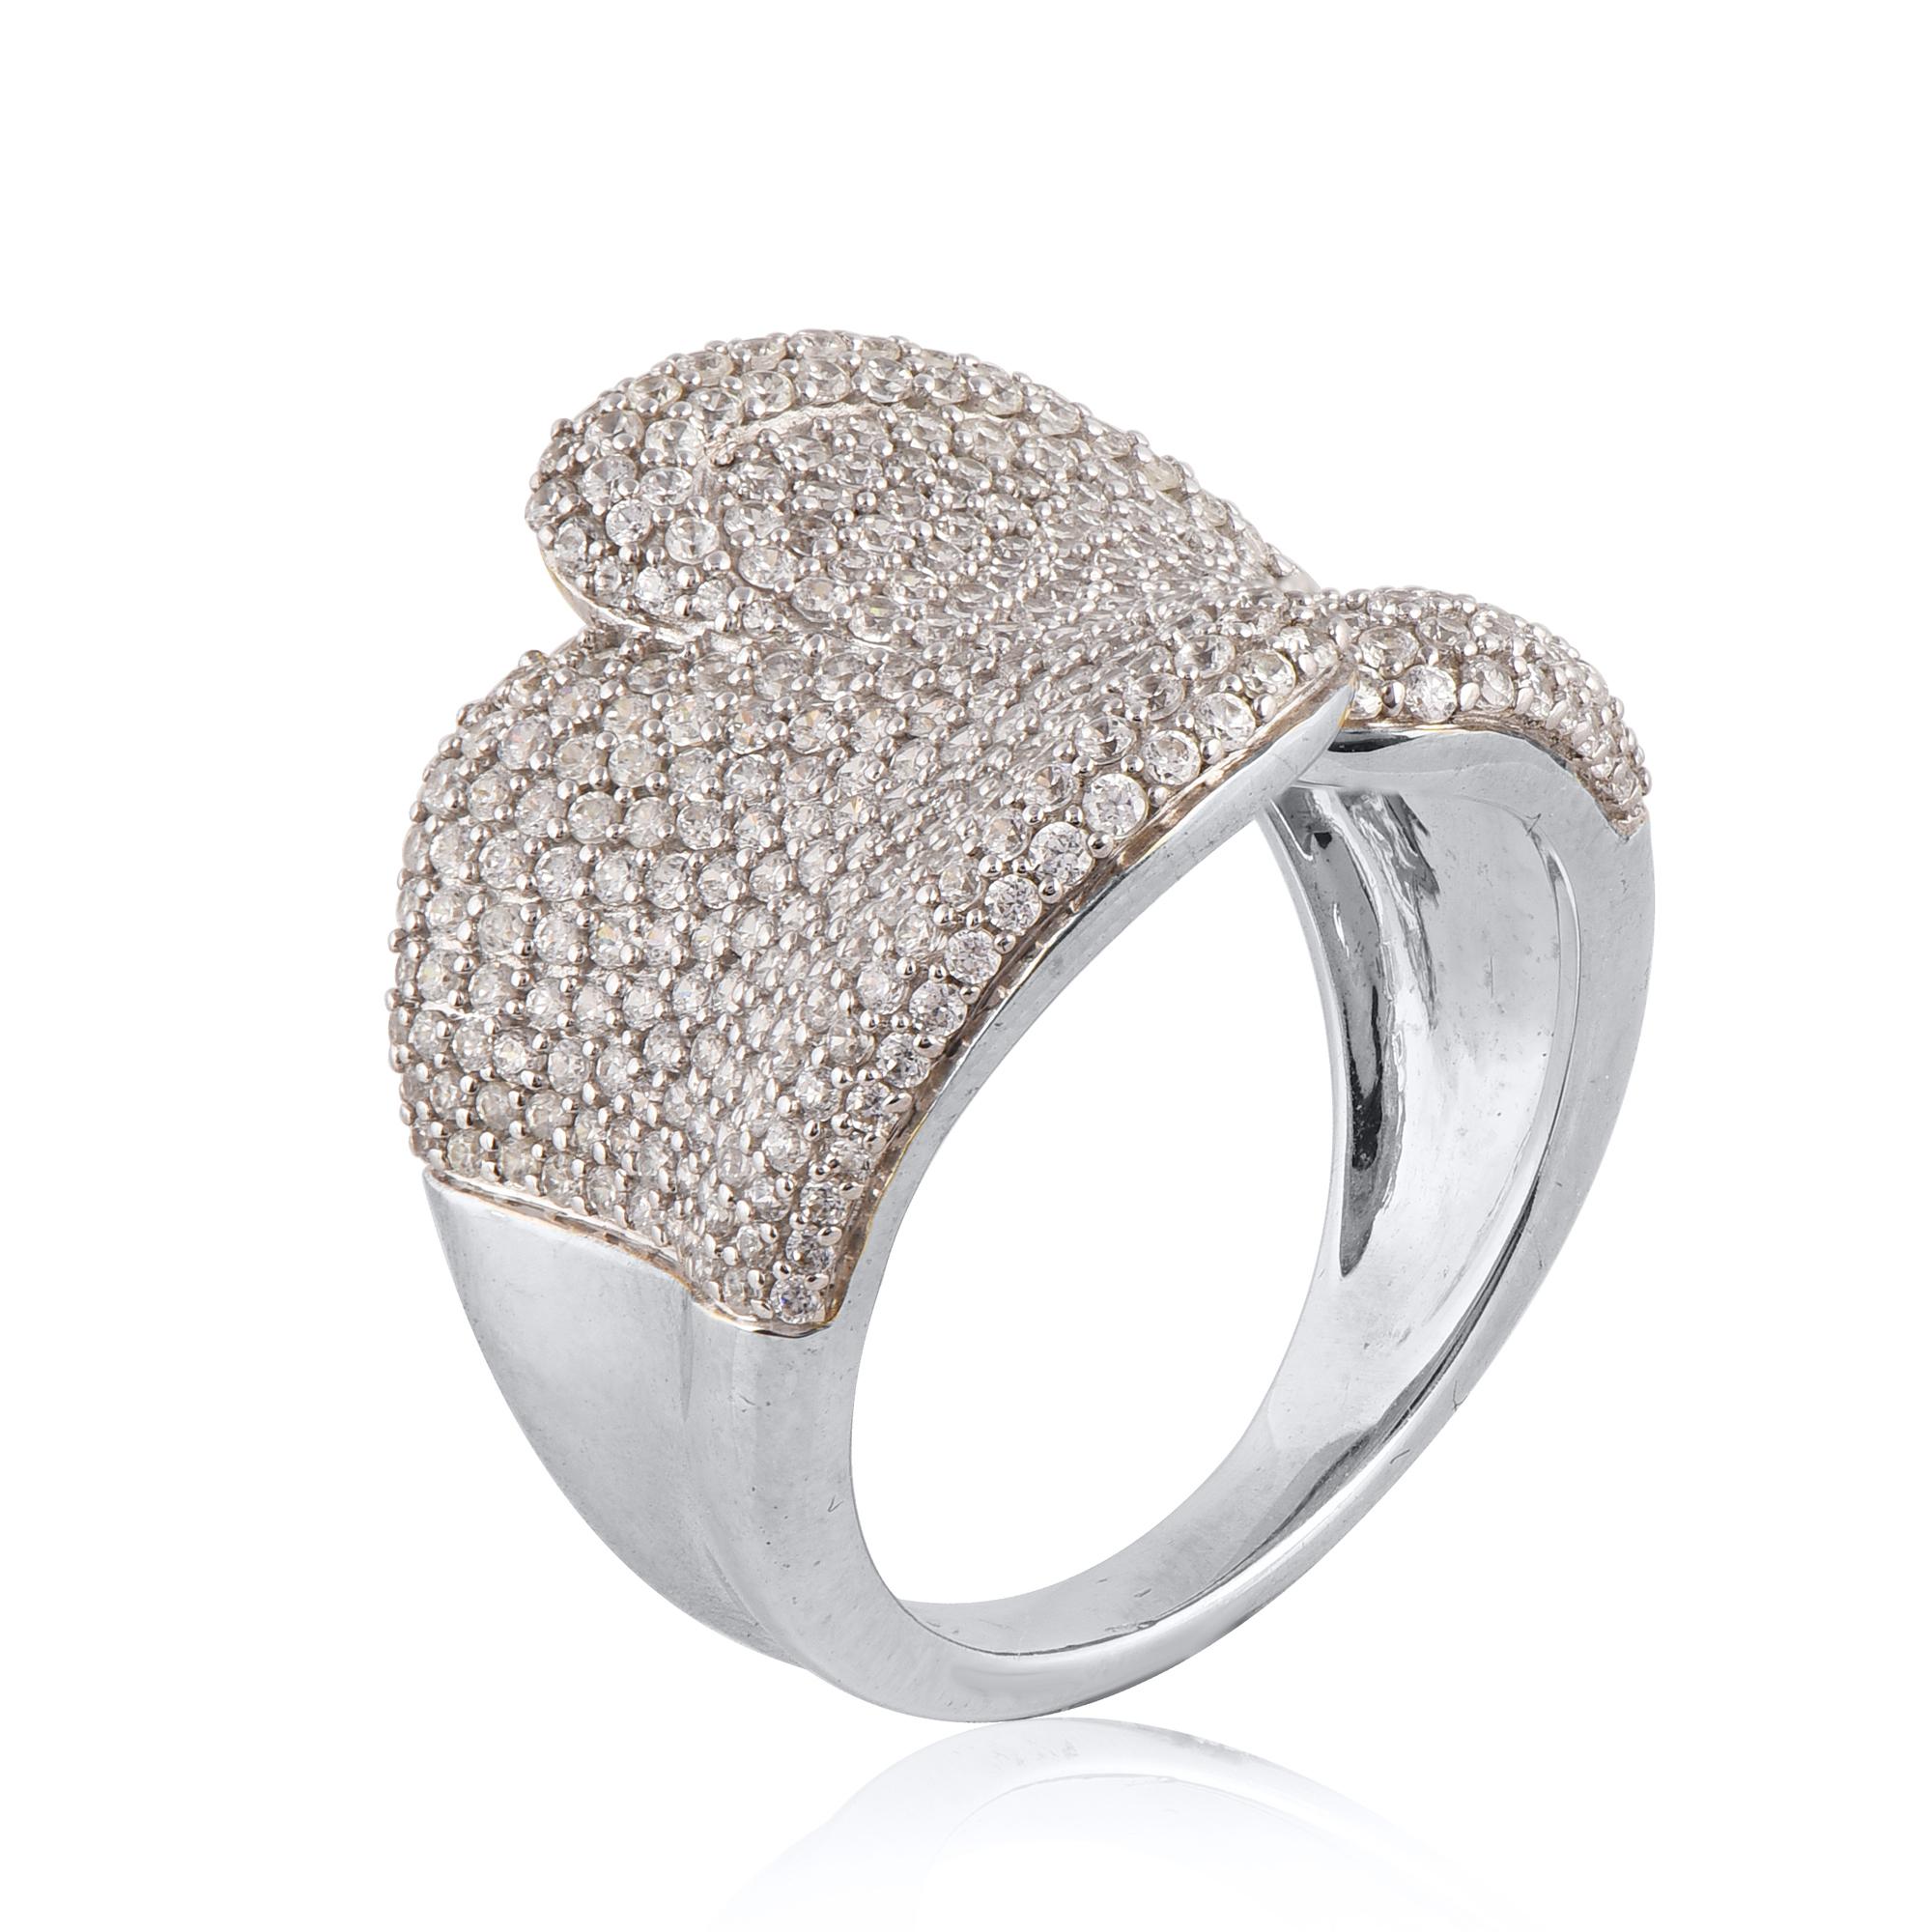 Stunning and classic, this diamond ring is beautifully crafted in 14K Solid White gold. The wide band is lined with rows of 372 round brilliant-cut sparkling white diamonds in secured prong and pave settings. The diamonds are natural, not-treated